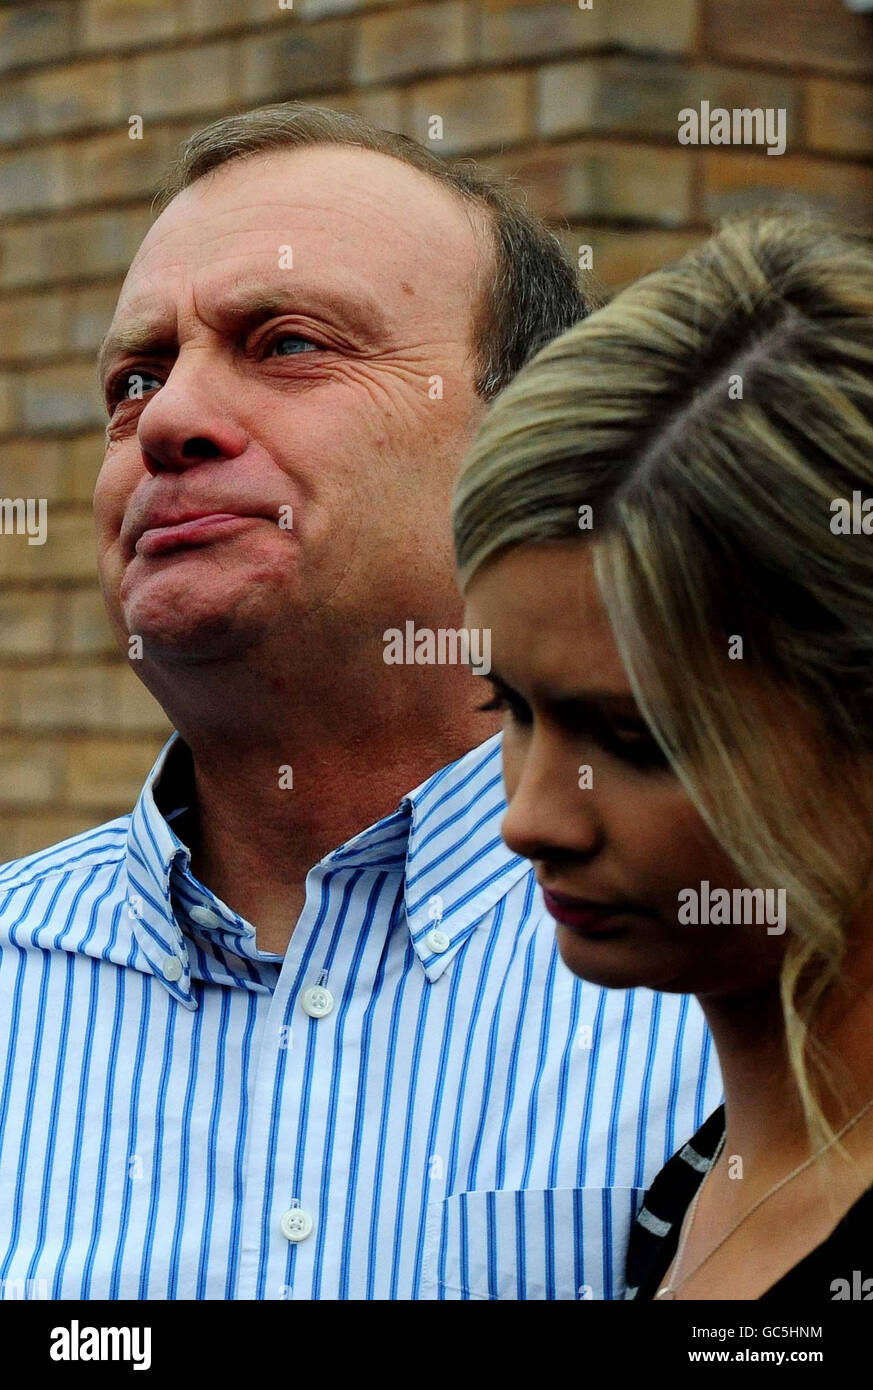 Bill Hawker, the father of British teacher, Lindsay Ann Hawker who was murdered in Japan, stands with his daughter Lisa, speak to the media outside their home in Brandon, Coventry, following the arrest of her suspected killer. Stock Photo